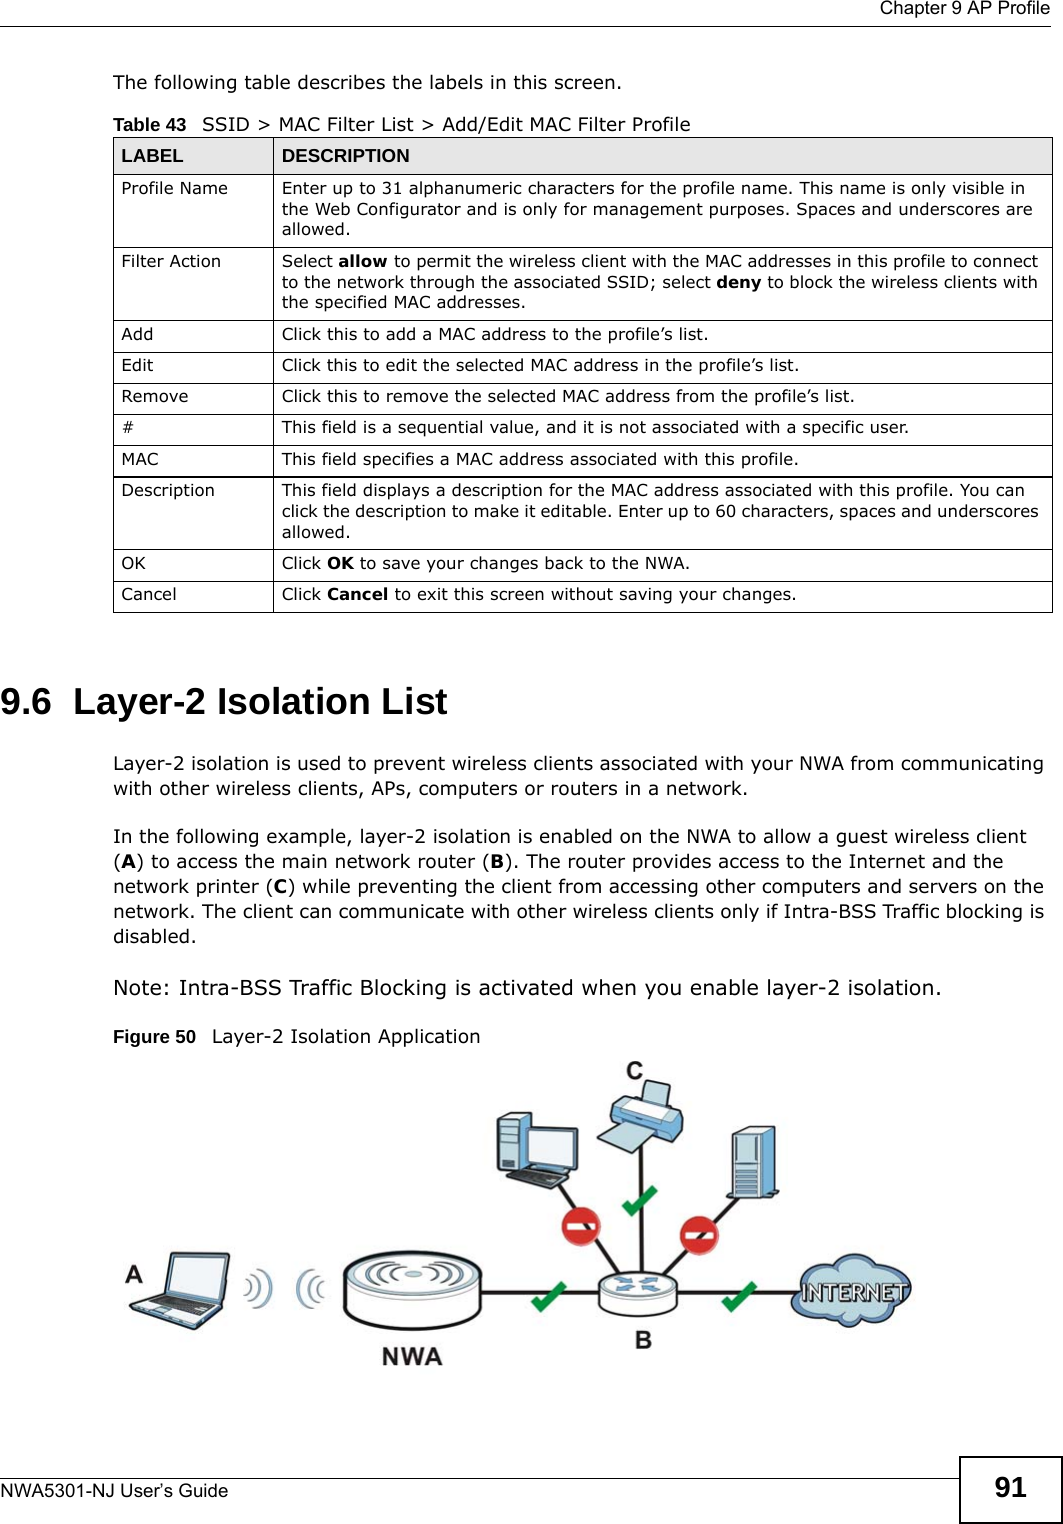  Chapter 9 AP ProfileNWA5301-NJ User’s Guide 91The following table describes the labels in this screen.  9.6  Layer-2 Isolation ListLayer-2 isolation is used to prevent wireless clients associated with your NWA from communicating with other wireless clients, APs, computers or routers in a network.In the following example, layer-2 isolation is enabled on the NWA to allow a guest wireless client (A) to access the main network router (B). The router provides access to the Internet and the network printer (C) while preventing the client from accessing other computers and servers on the network. The client can communicate with other wireless clients only if Intra-BSS Traffic blocking is disabled.Note: Intra-BSS Traffic Blocking is activated when you enable layer-2 isolation.Figure 50   Layer-2 Isolation ApplicationTable 43   SSID &gt; MAC Filter List &gt; Add/Edit MAC Filter ProfileLABEL DESCRIPTIONProfile Name Enter up to 31 alphanumeric characters for the profile name. This name is only visible in the Web Configurator and is only for management purposes. Spaces and underscores are allowed.Filter Action Select allow to permit the wireless client with the MAC addresses in this profile to connect to the network through the associated SSID; select deny to block the wireless clients with the specified MAC addresses.Add Click this to add a MAC address to the profile’s list.Edit Click this to edit the selected MAC address in the profile’s list.Remove Click this to remove the selected MAC address from the profile’s list.# This field is a sequential value, and it is not associated with a specific user.MAC This field specifies a MAC address associated with this profile.Description This field displays a description for the MAC address associated with this profile. You can click the description to make it editable. Enter up to 60 characters, spaces and underscores allowed.OK Click OK to save your changes back to the NWA.Cancel Click Cancel to exit this screen without saving your changes.